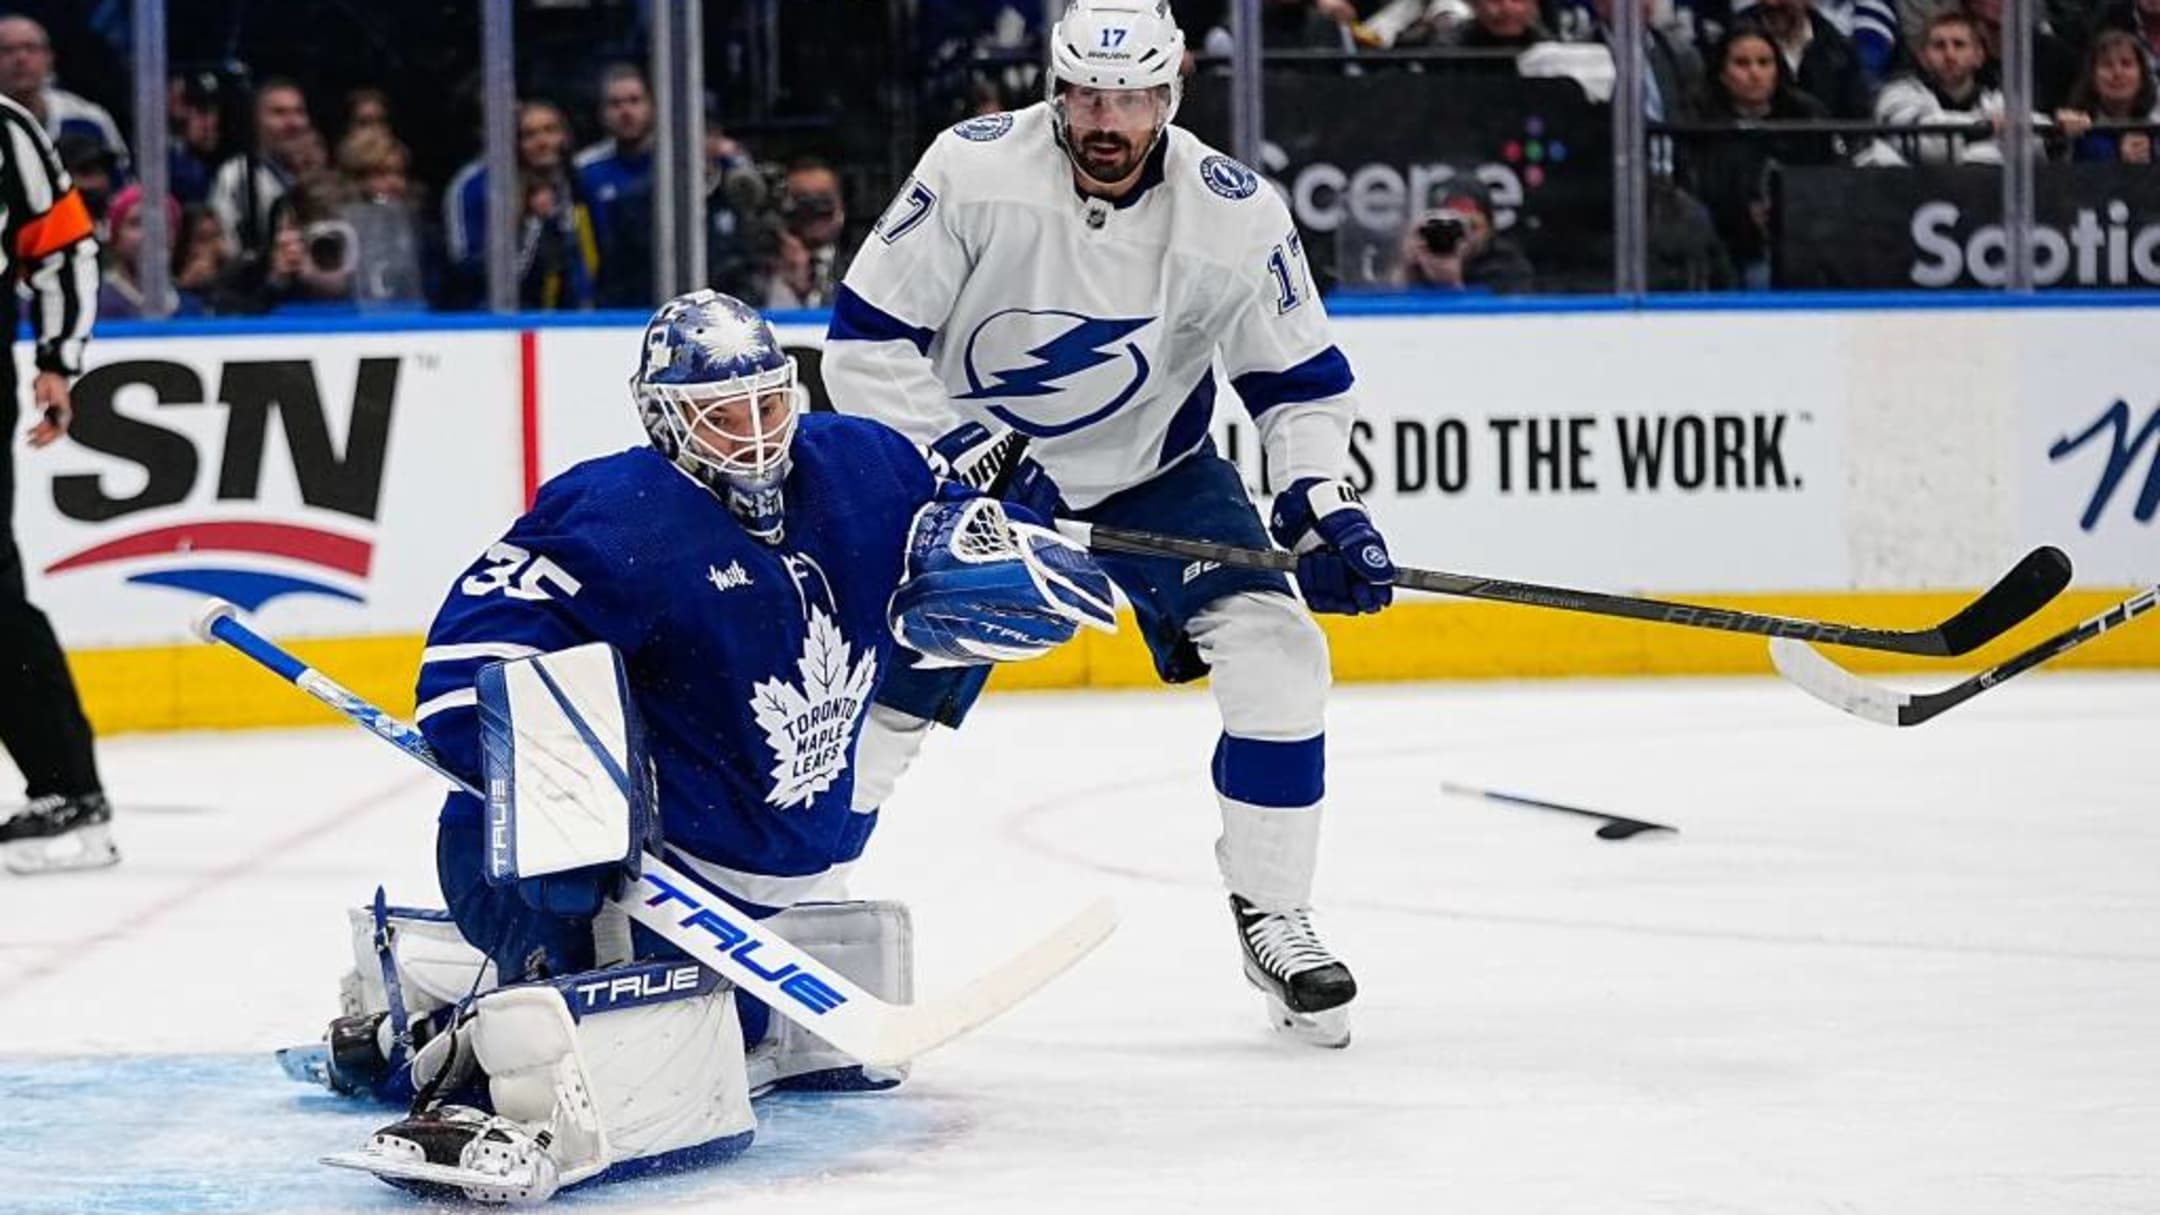 Maple Leafs-Lightning live stream: Start time, TV channel, how to